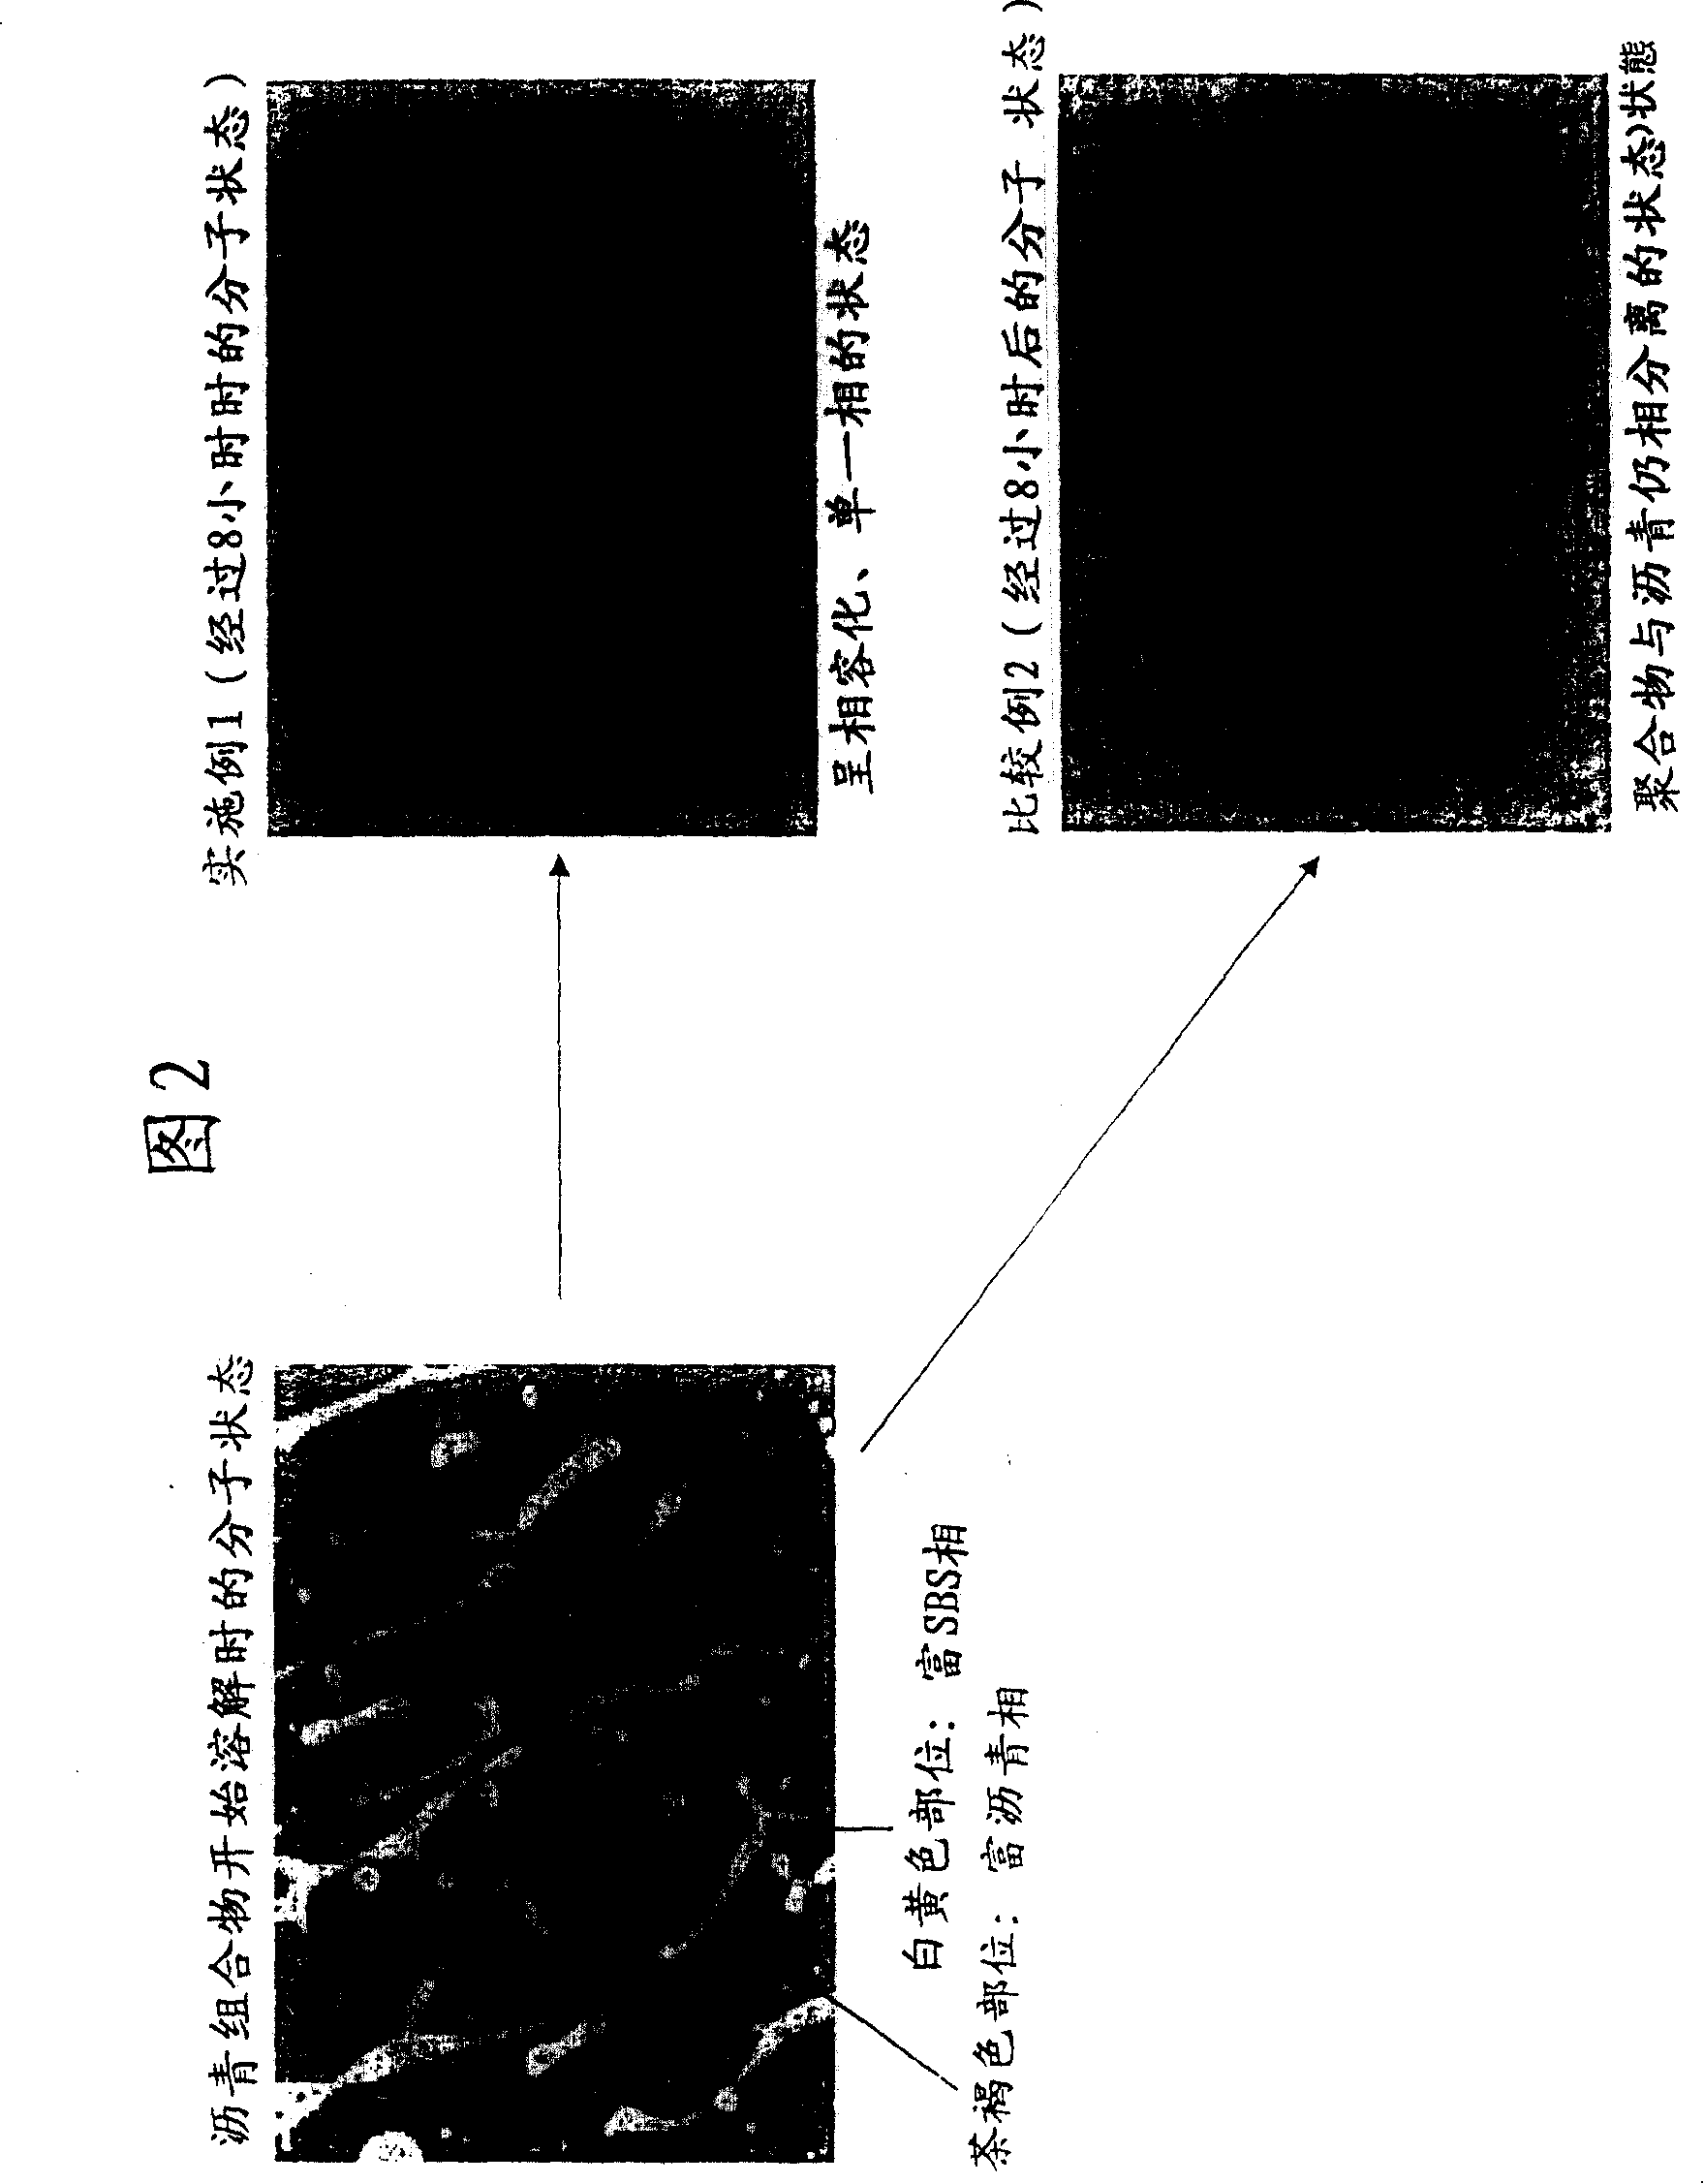 Block (co)polymer, block copolymer composition for asphalt modification, process for producing the same, and asphalt composition